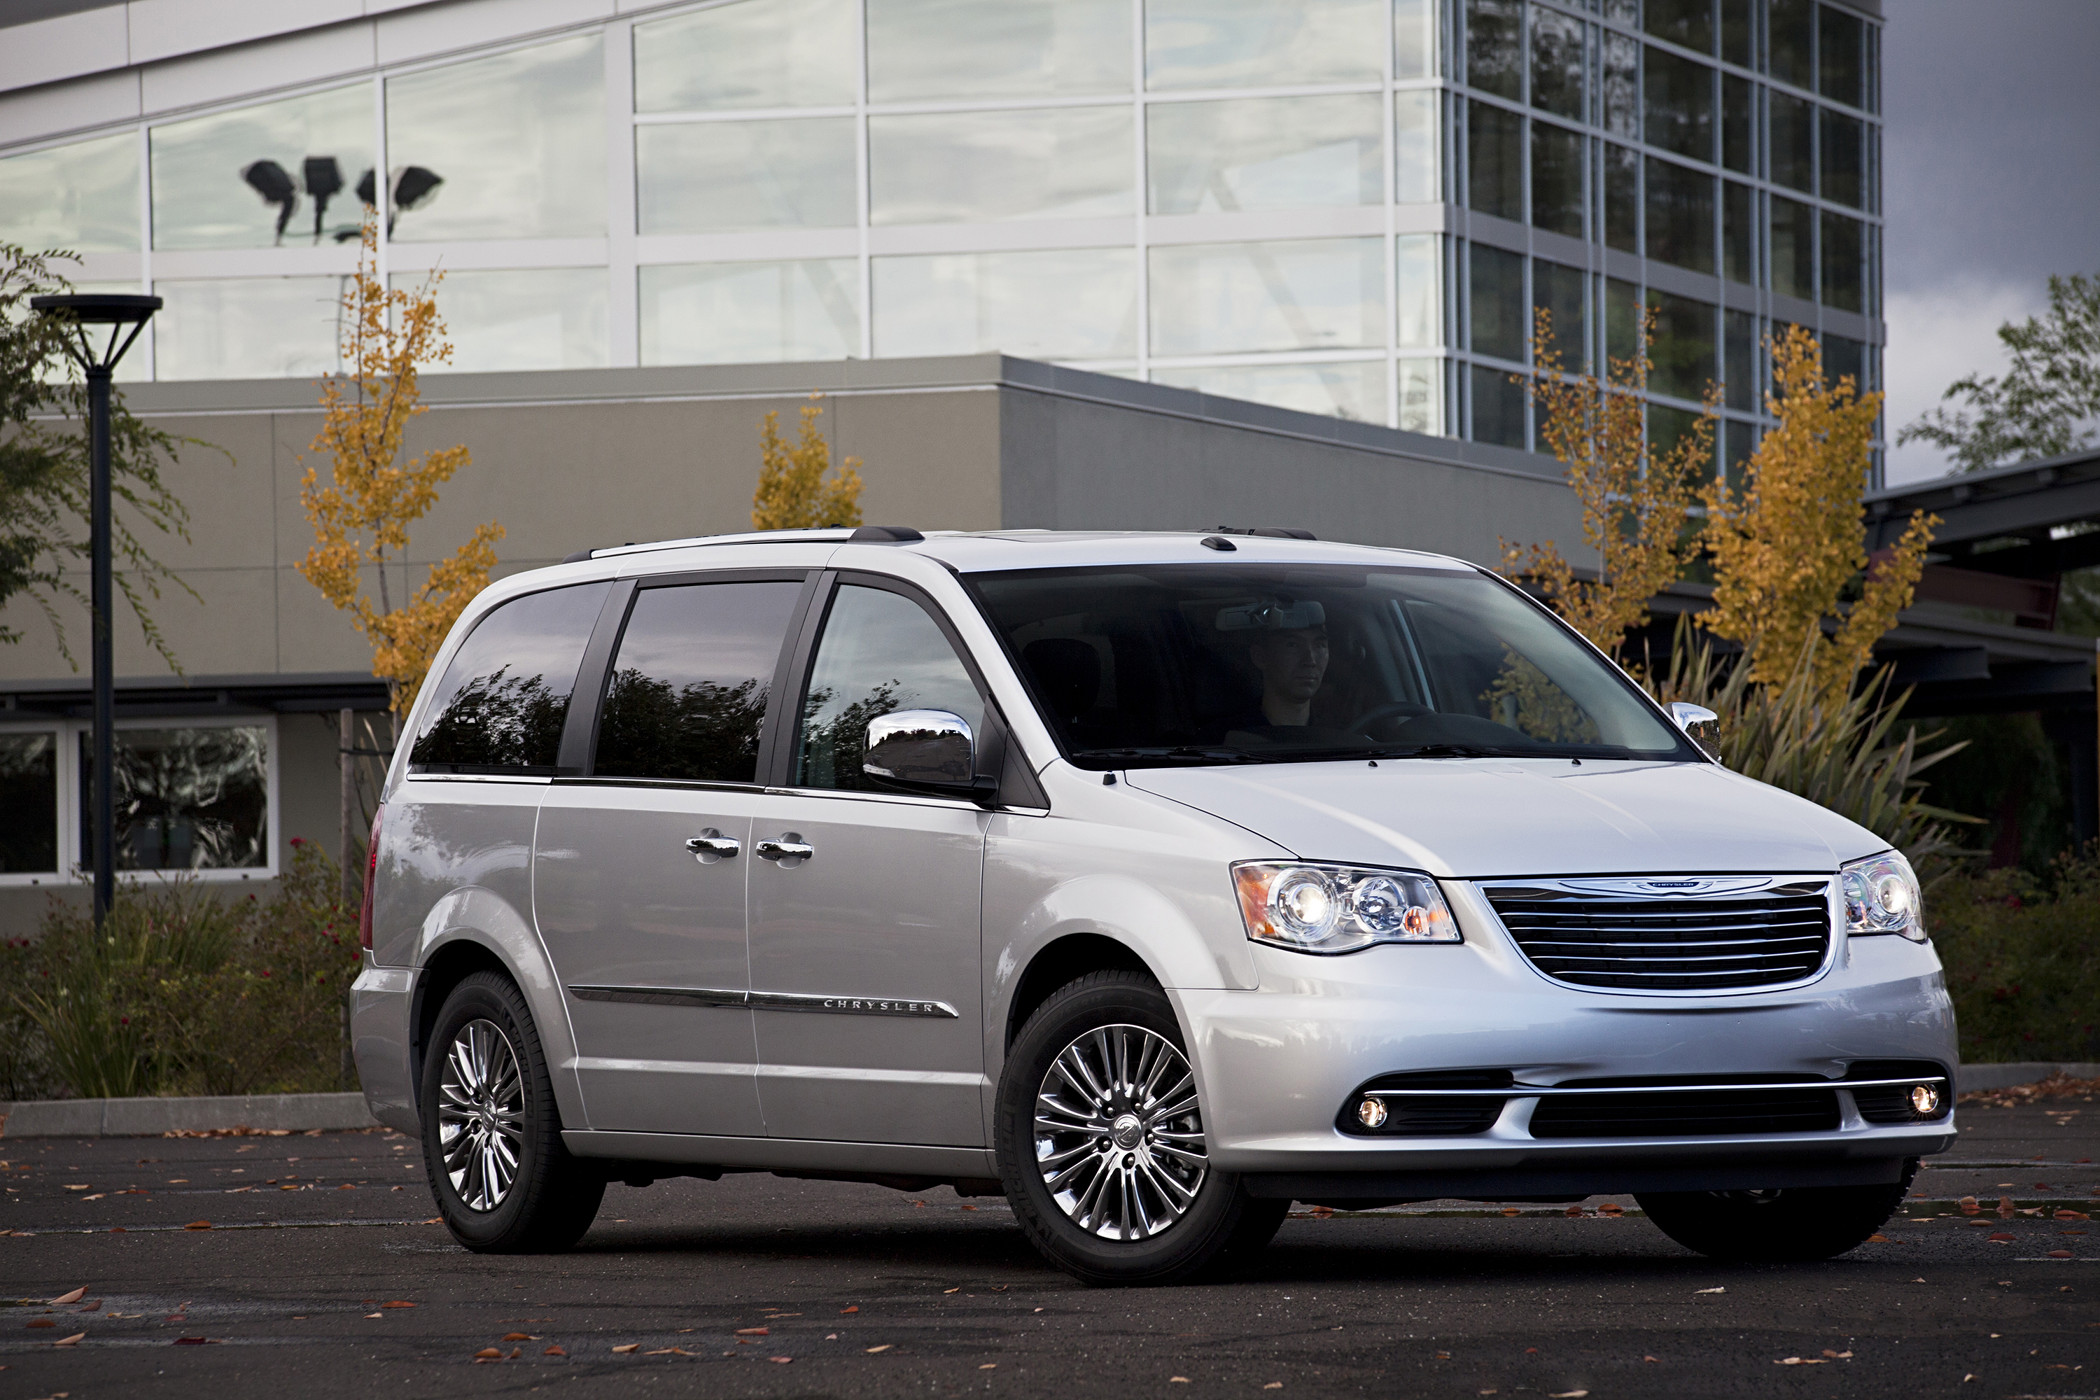 Parts for chrysler town and country minivan #1